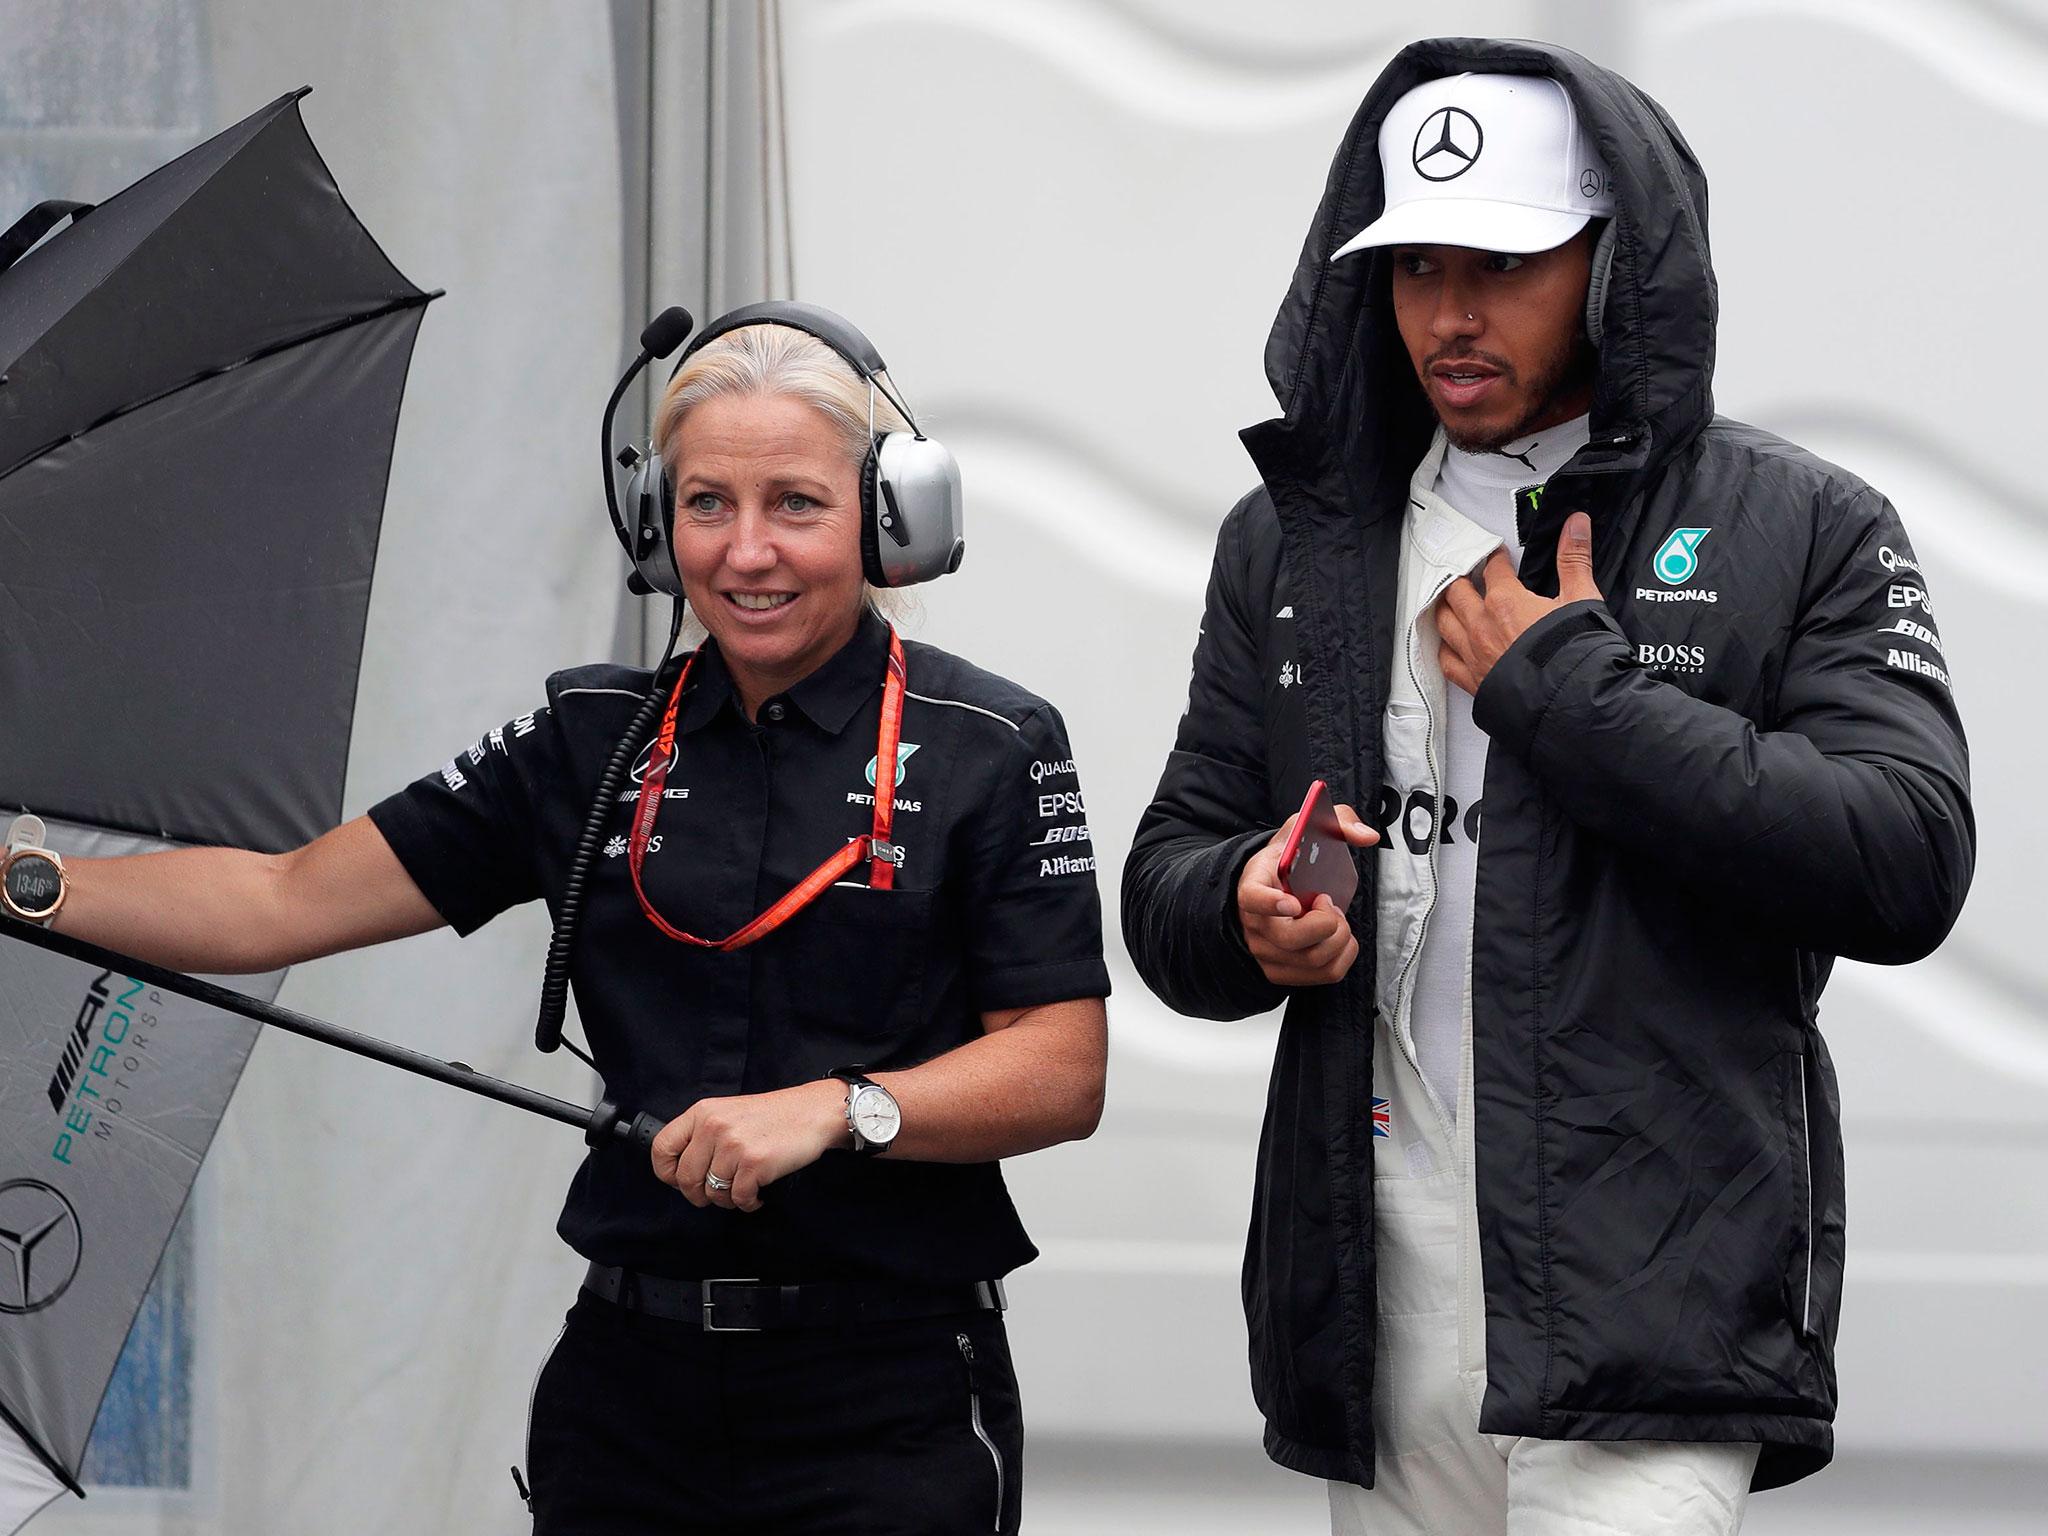 &#13;
Hamilton made the best of the tricky wet conditions &#13;